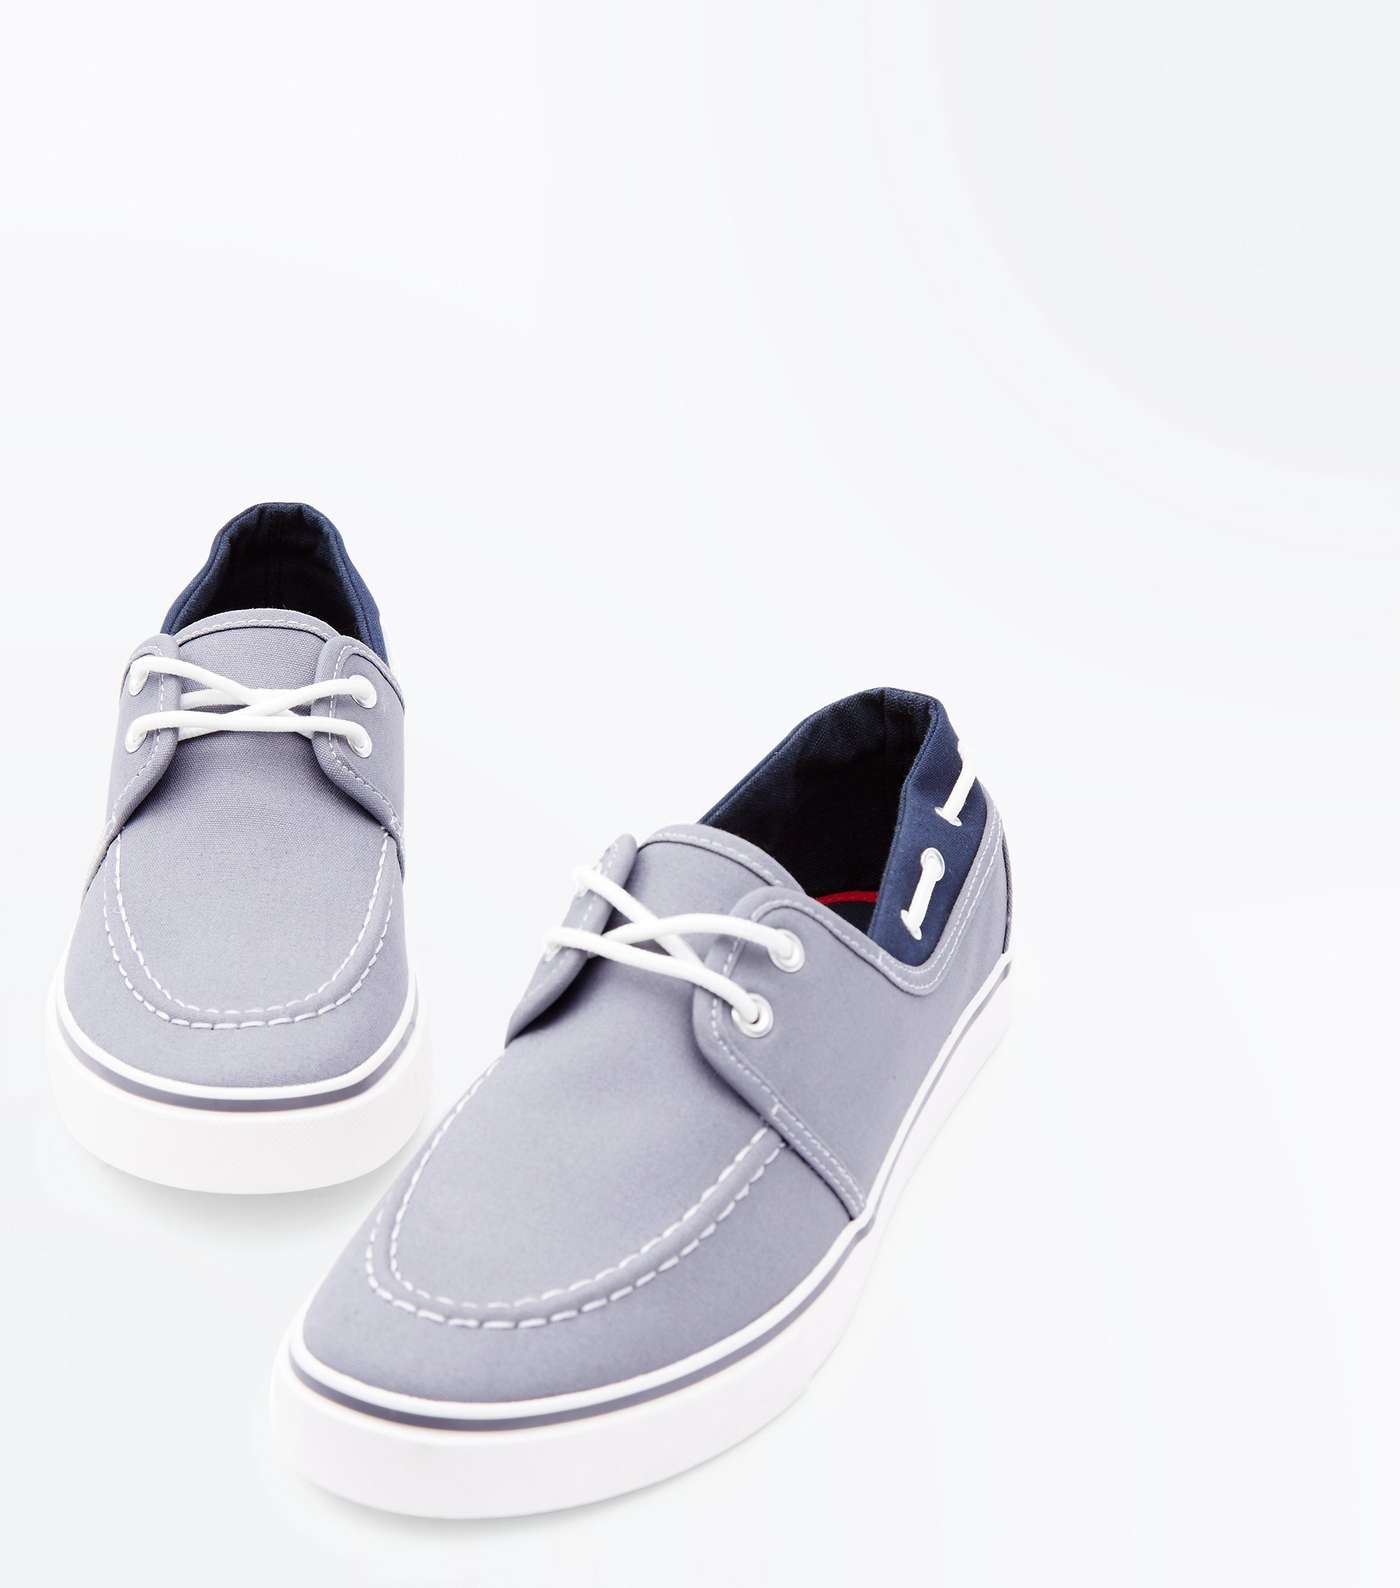 Grey Lace Up Canvas Boat Shoes Image 3